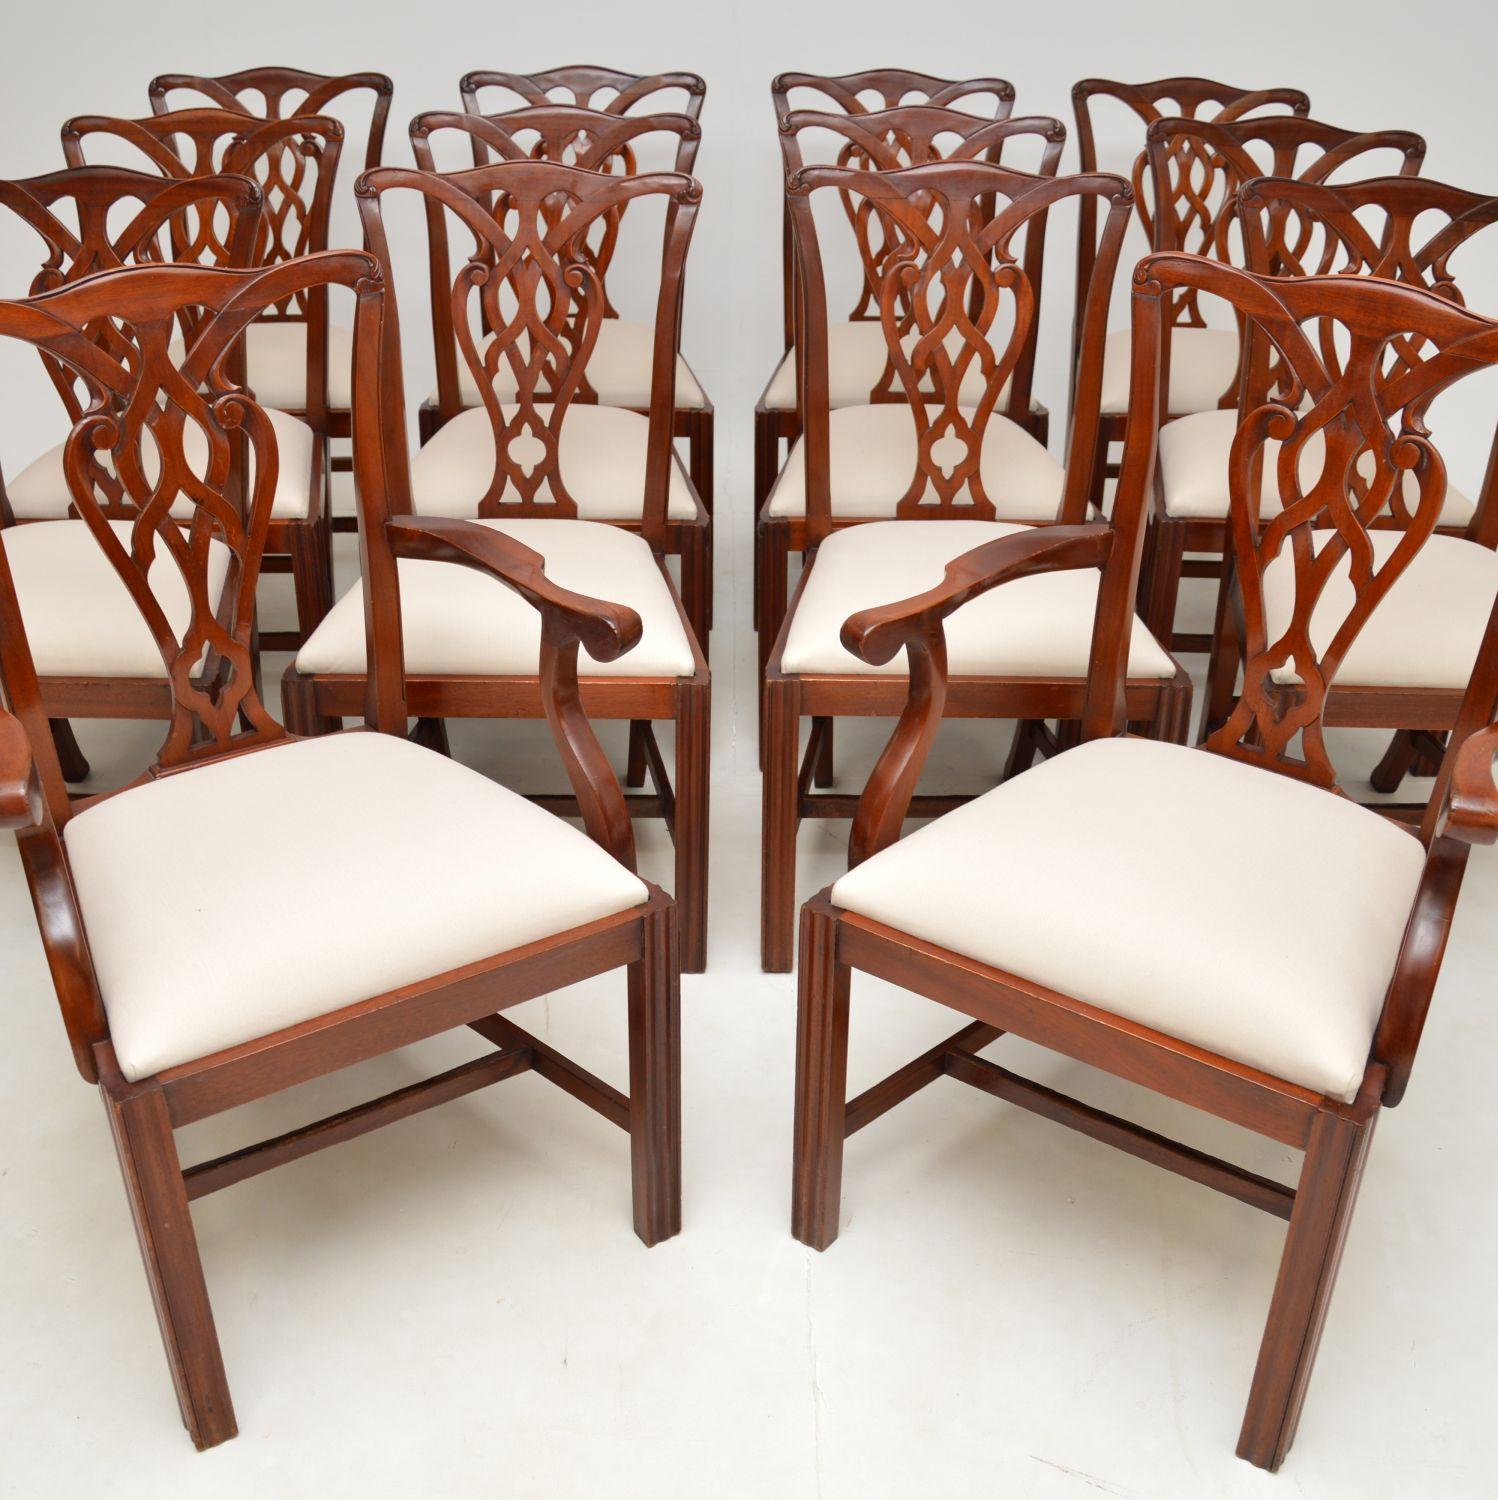 A grand set of fourteen antique dining chairs in the Chippendale style. They were made in England, and they date from around the 1950’s.

The quality is fantastic, they are all beautifully constructed with beautiful pierced lattice backs. They sit